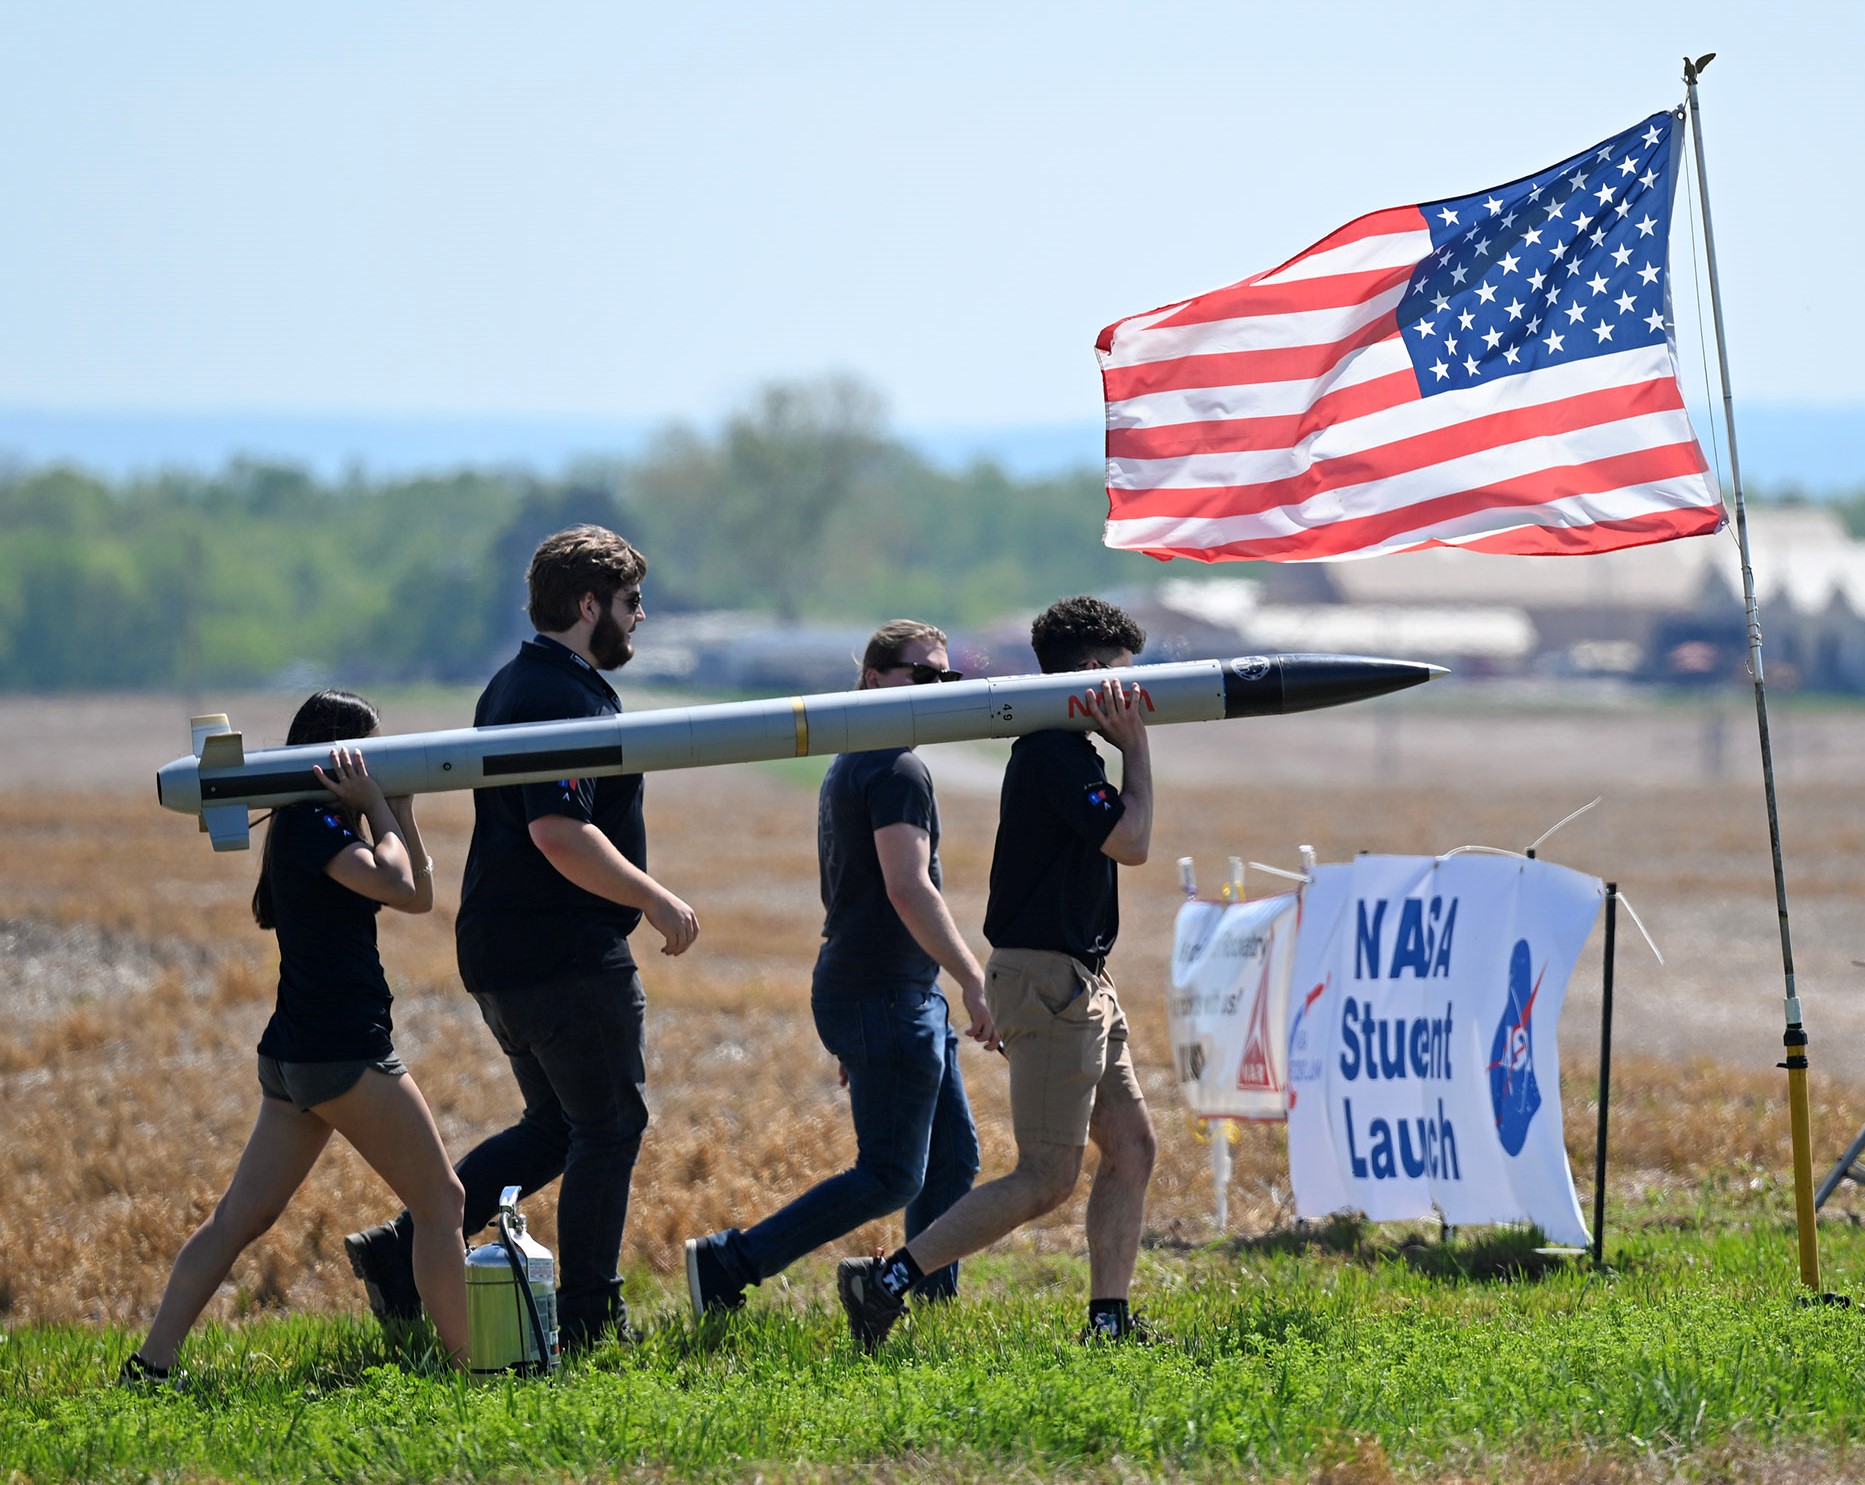 Students from the University of North Carolina at Charlotte, carry their rocket to the launch pad during NASAs 2023 Student Launch competition near NASAs Marshall Space Flight Center in Huntsville, Alabama, April 15.